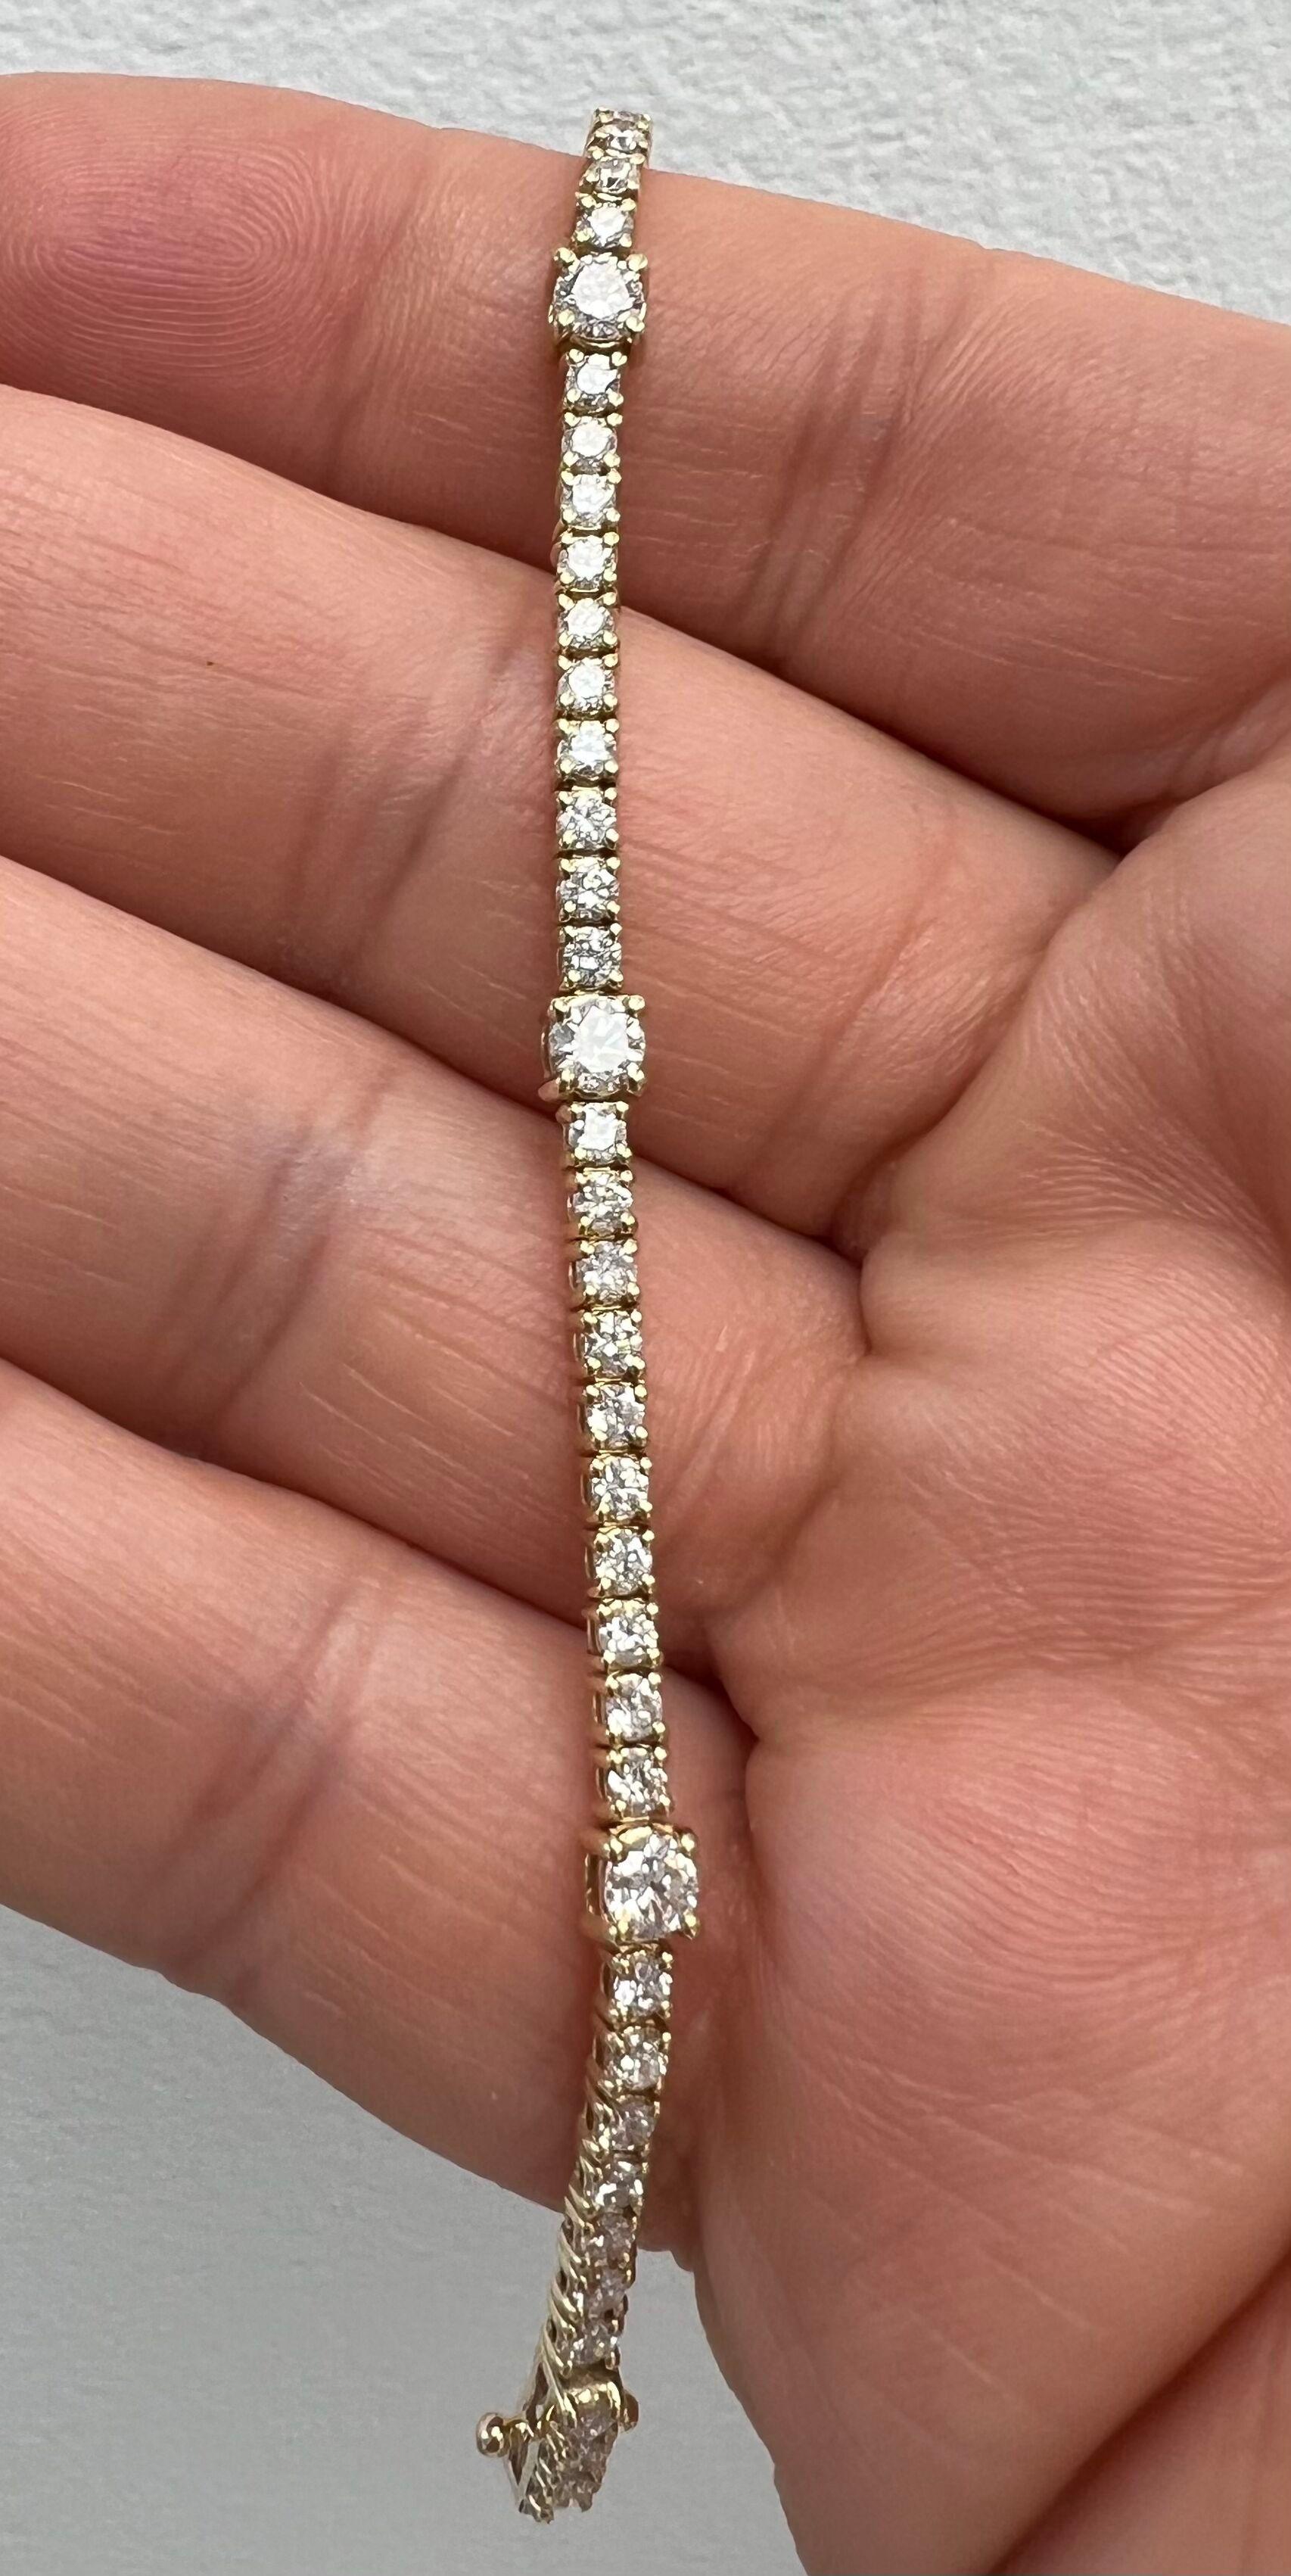 Unique Tennis Bracelet with Five Bigger Diamonds.
The Classic Bracelet with an Elegant and Unique Twist.
14k Yellow Gold
Number of Small Diamonds: 60 - Small Diamonds Weight: 2.55 Carats                                                   
Number of